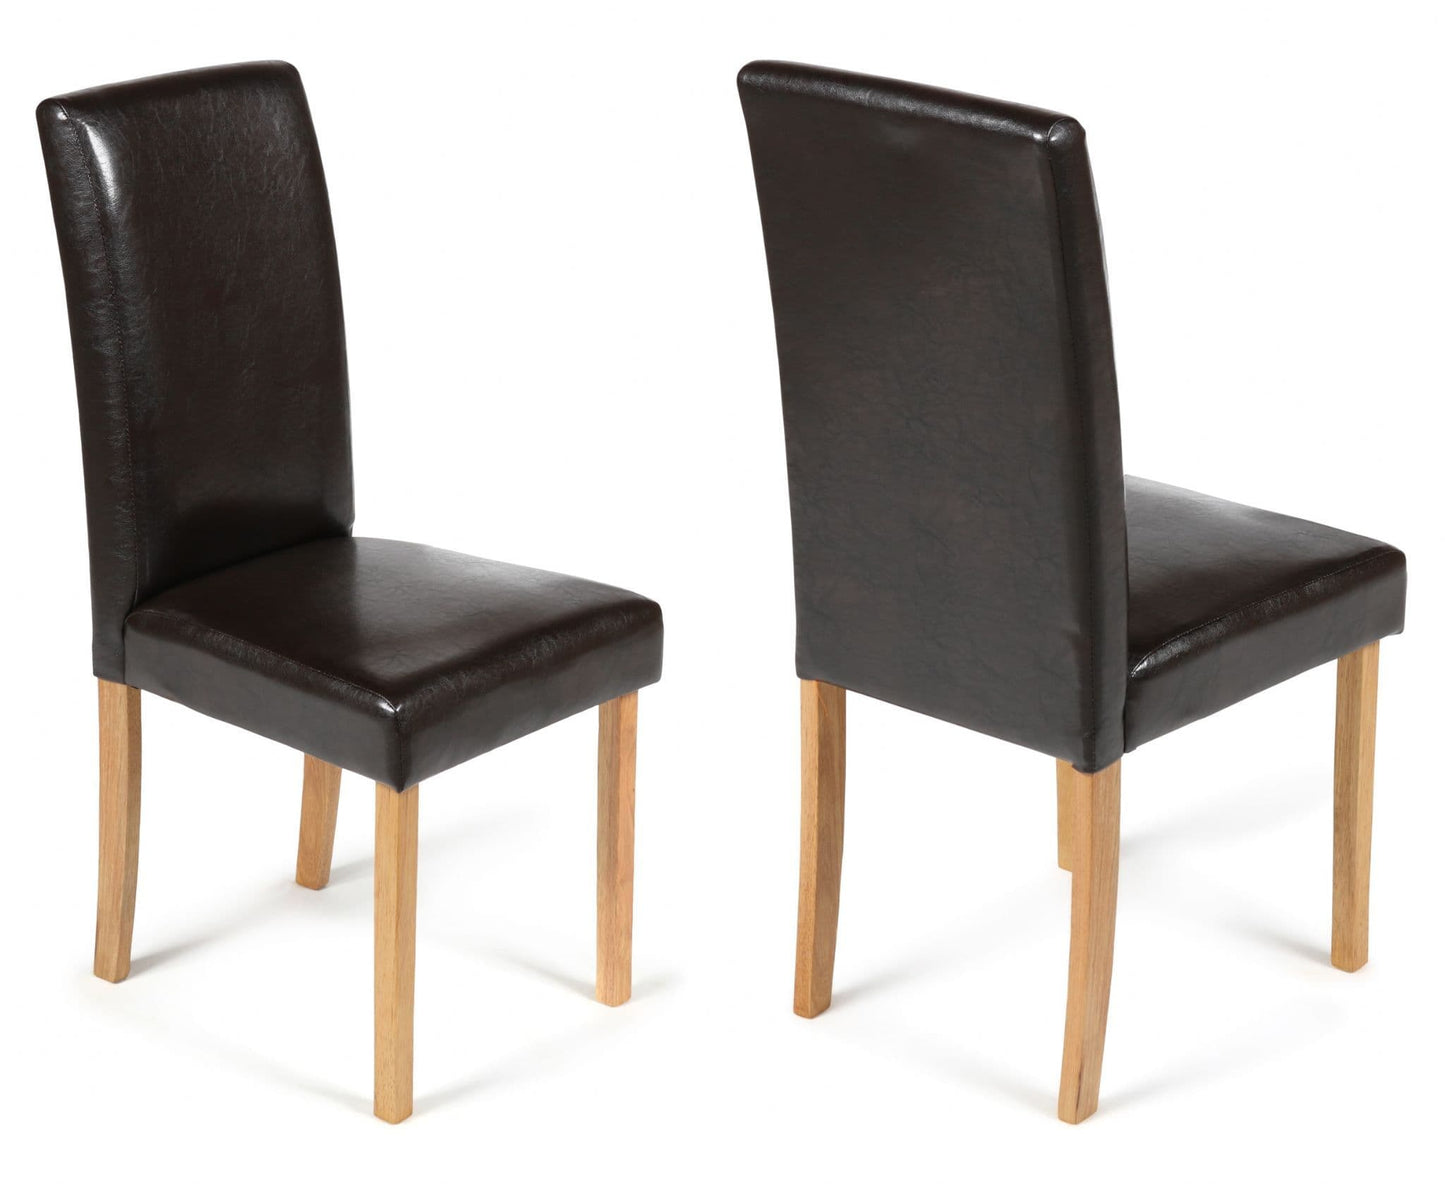 2 Brown Torino Faux Leather Dining Chairs